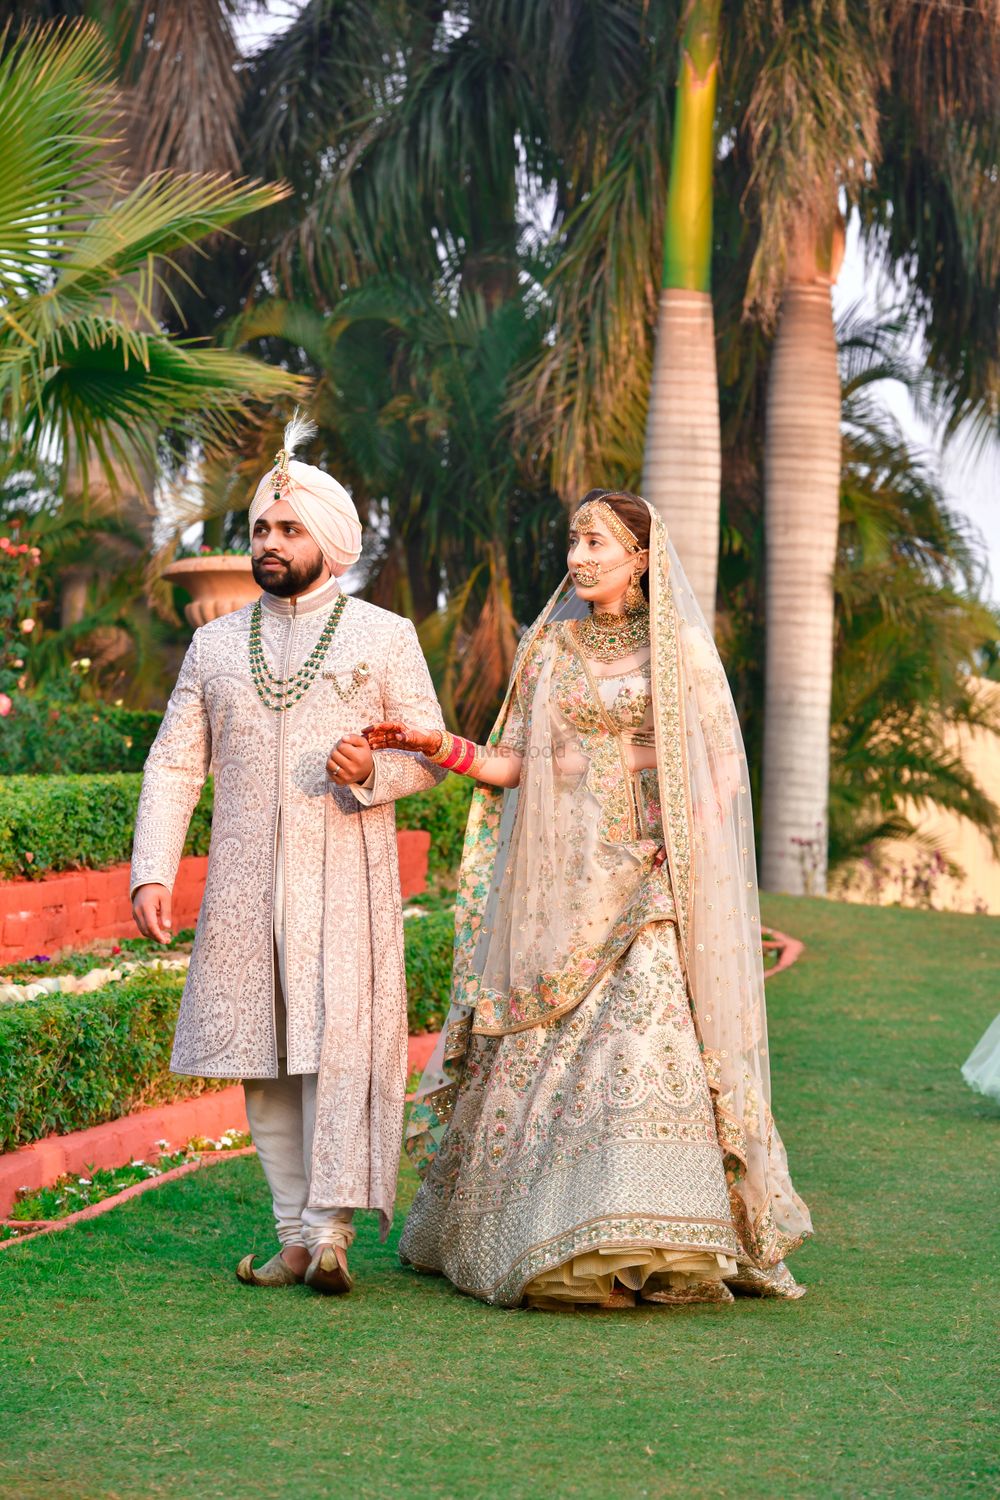 Photo of Candid shot of a royal Sikh couple color-coordinating in white.